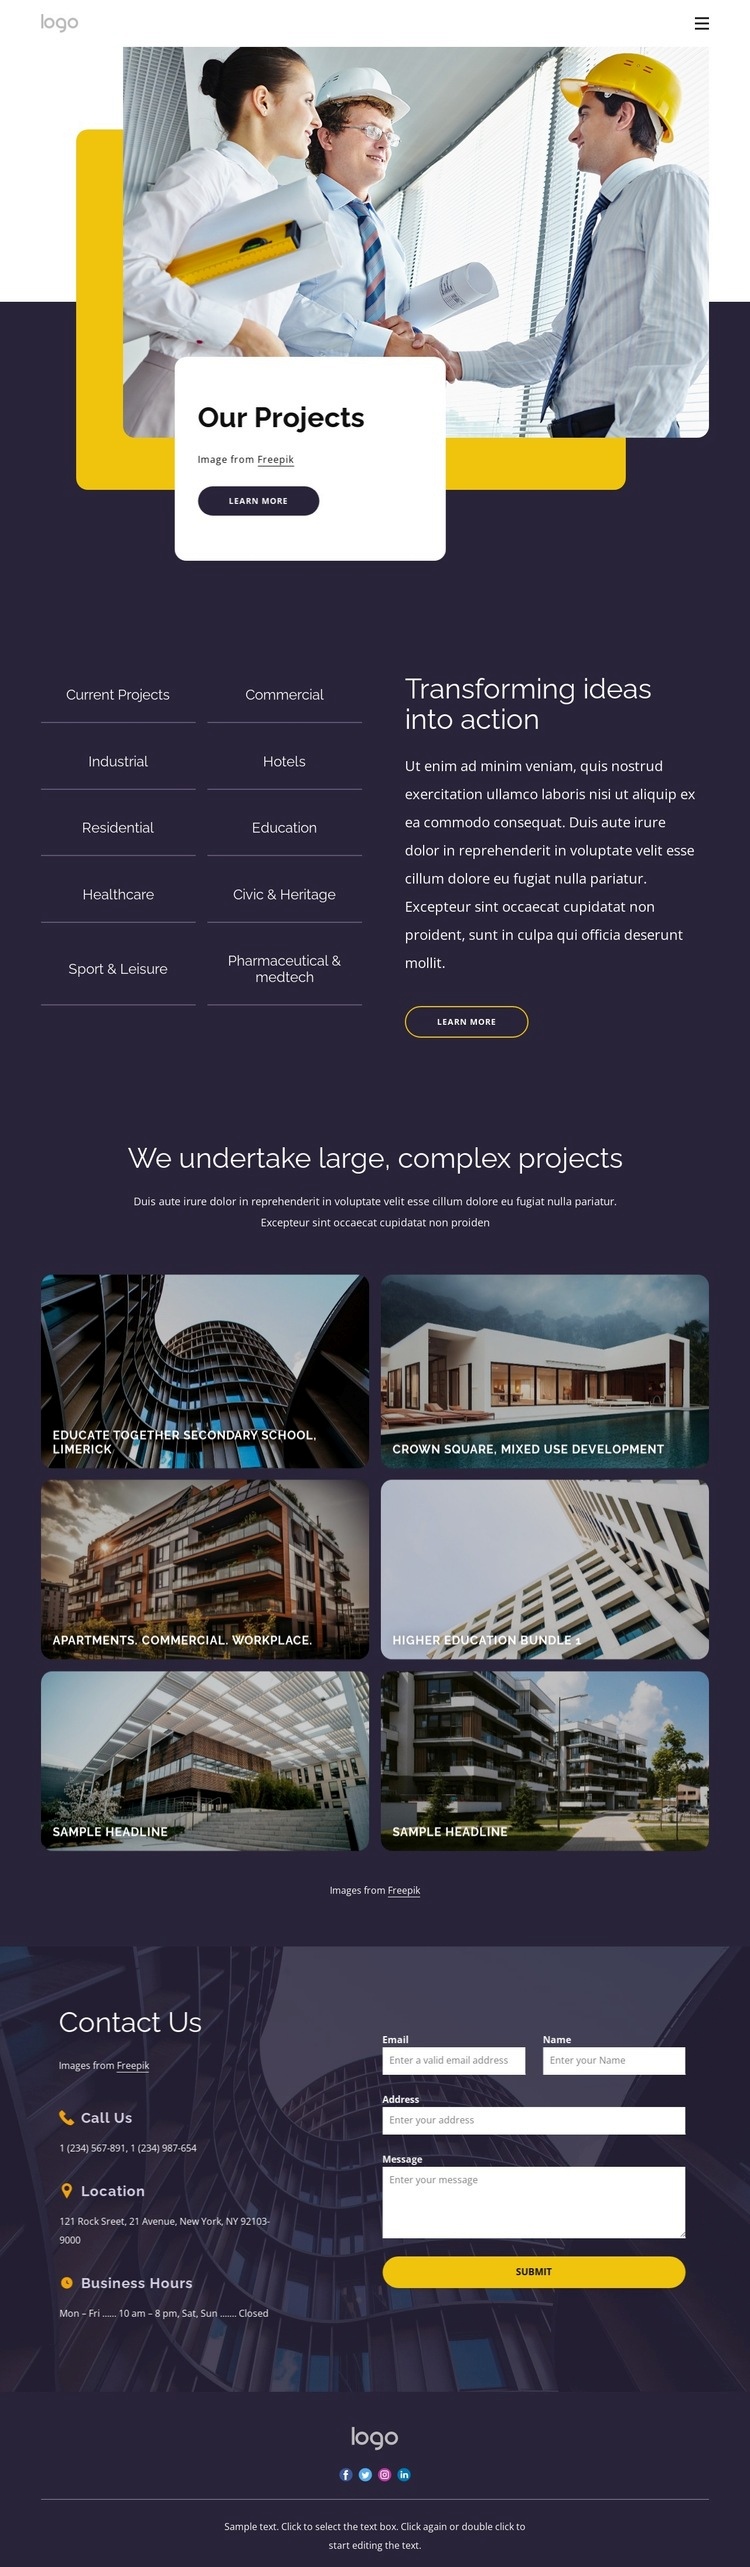 Building and construction projects Web Page Design